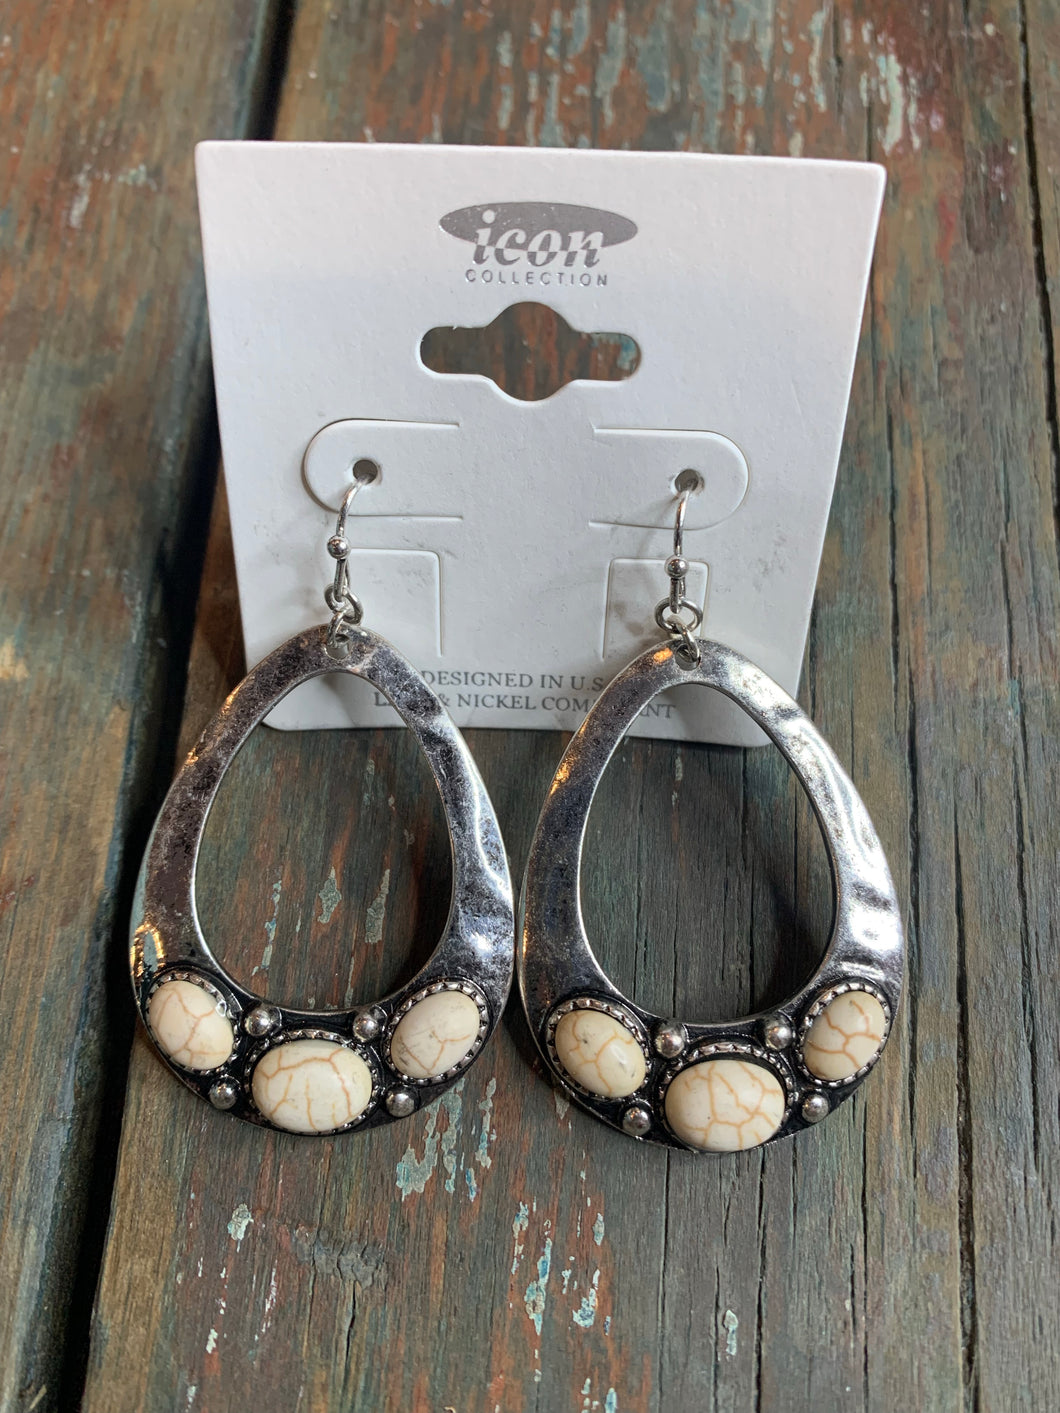 White and silver earrings